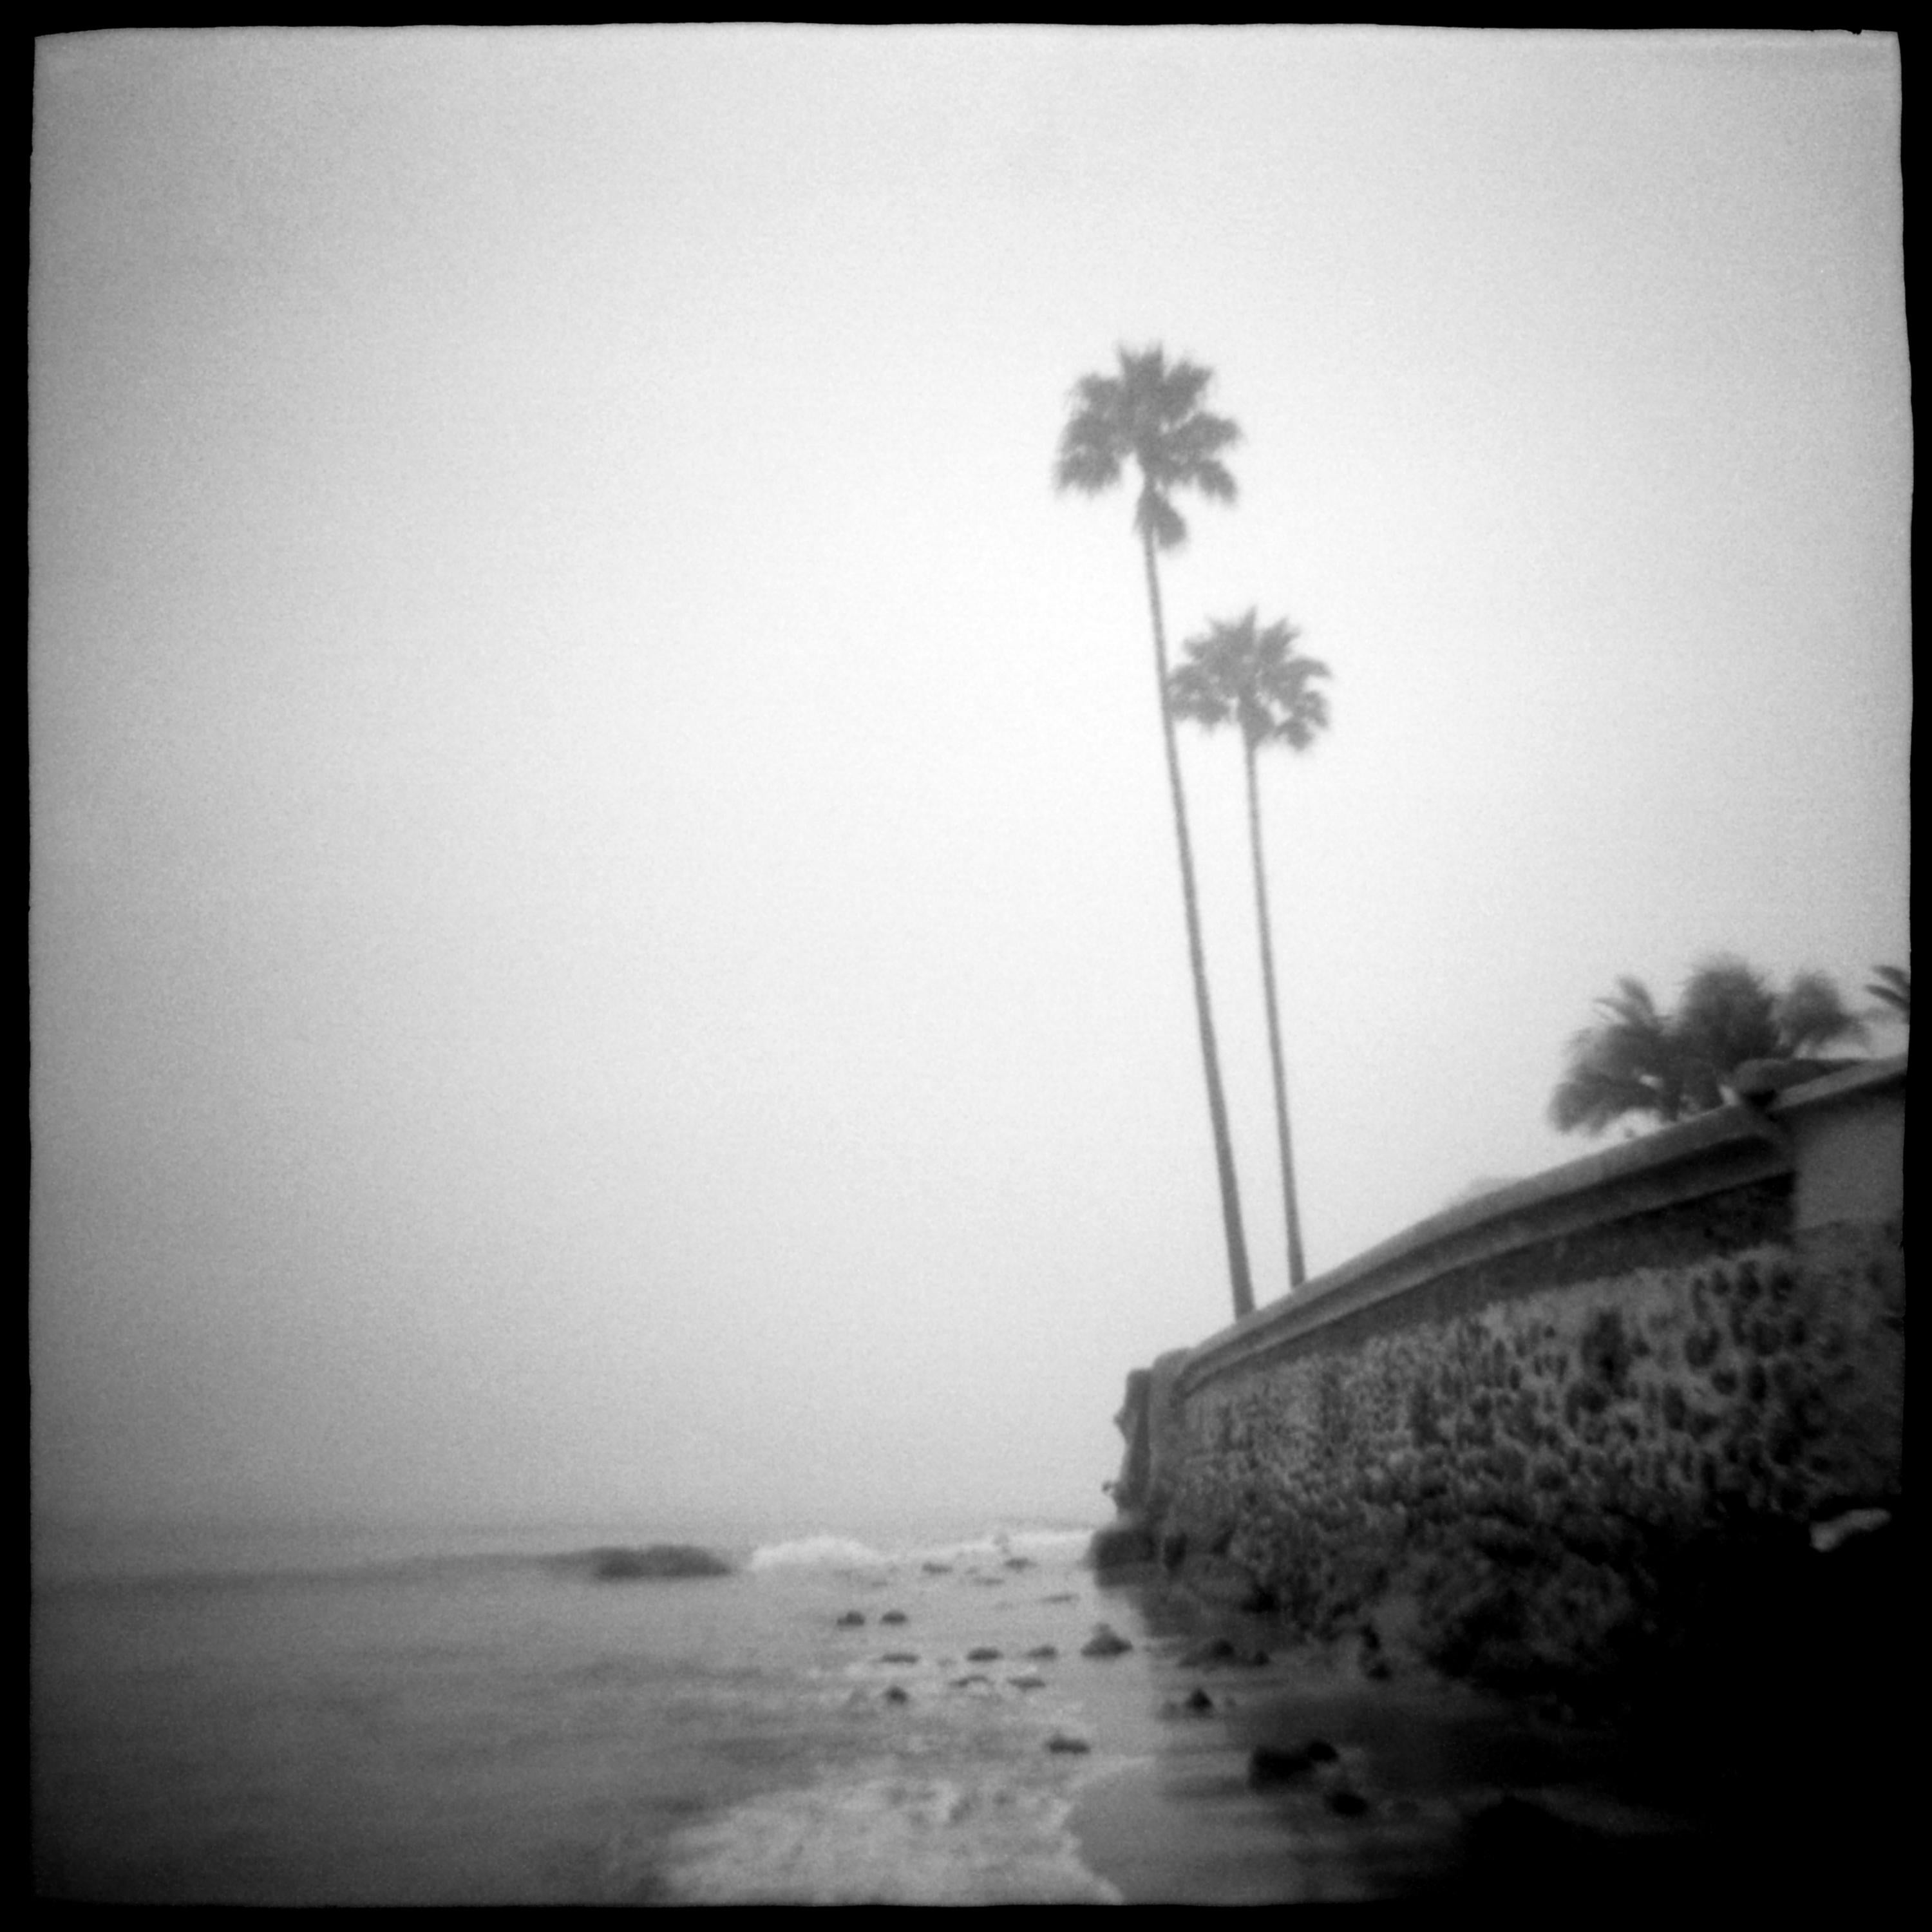 Daniel Grant Black and White Photograph - TWIN PALMS, Photograph, Archival Ink Jet